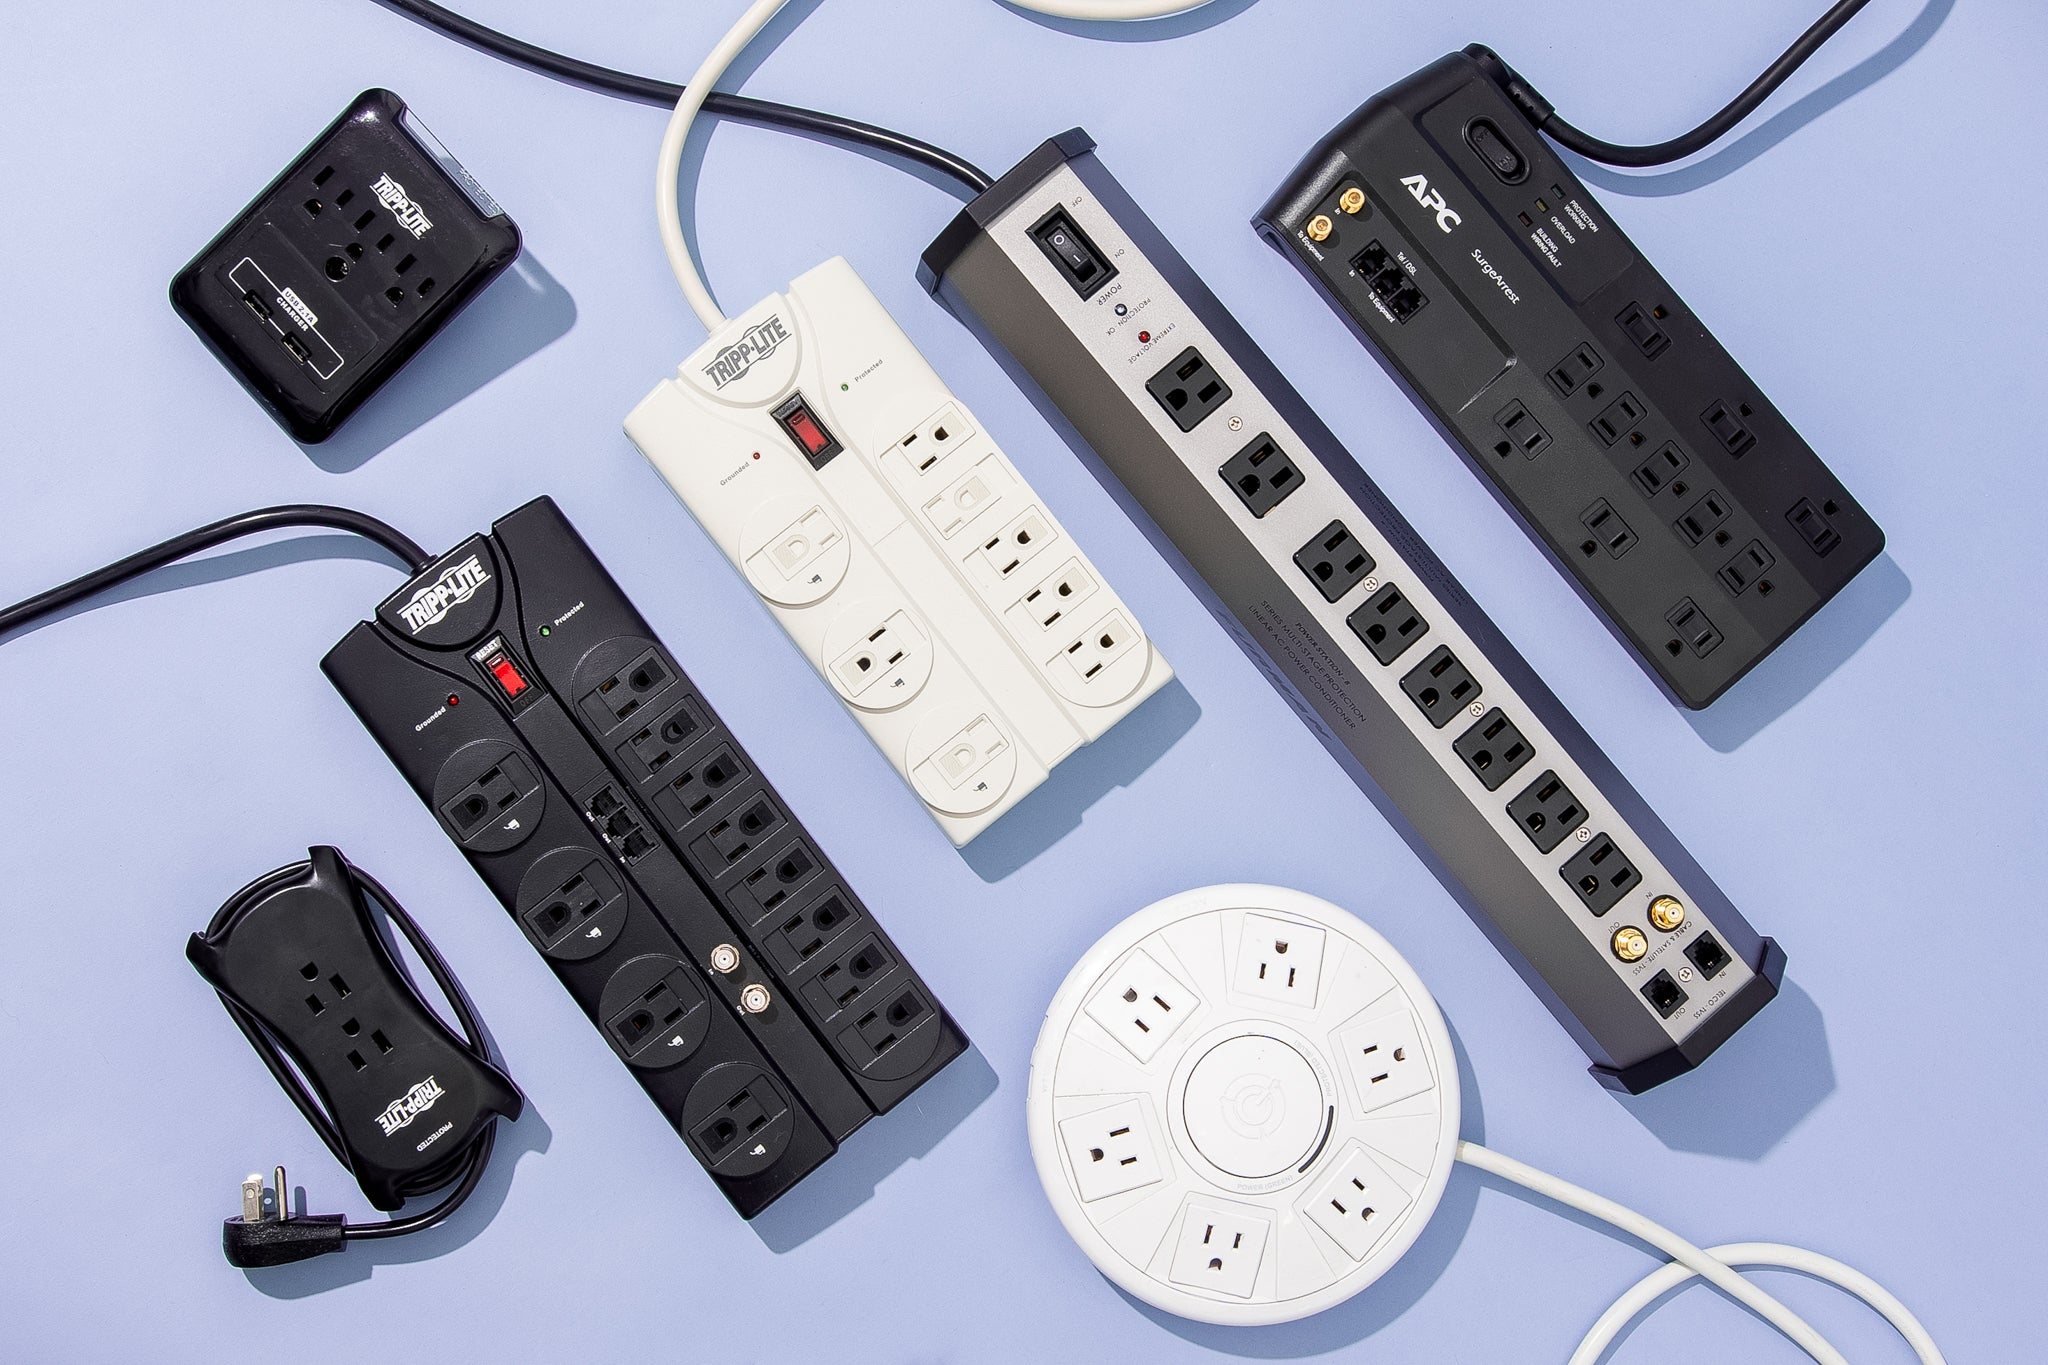 Plug the computer and other peripherals into surge protectors to safeguard against power surges.
Avoid sudden power outages by using an uninterruptible power supply (UPS).